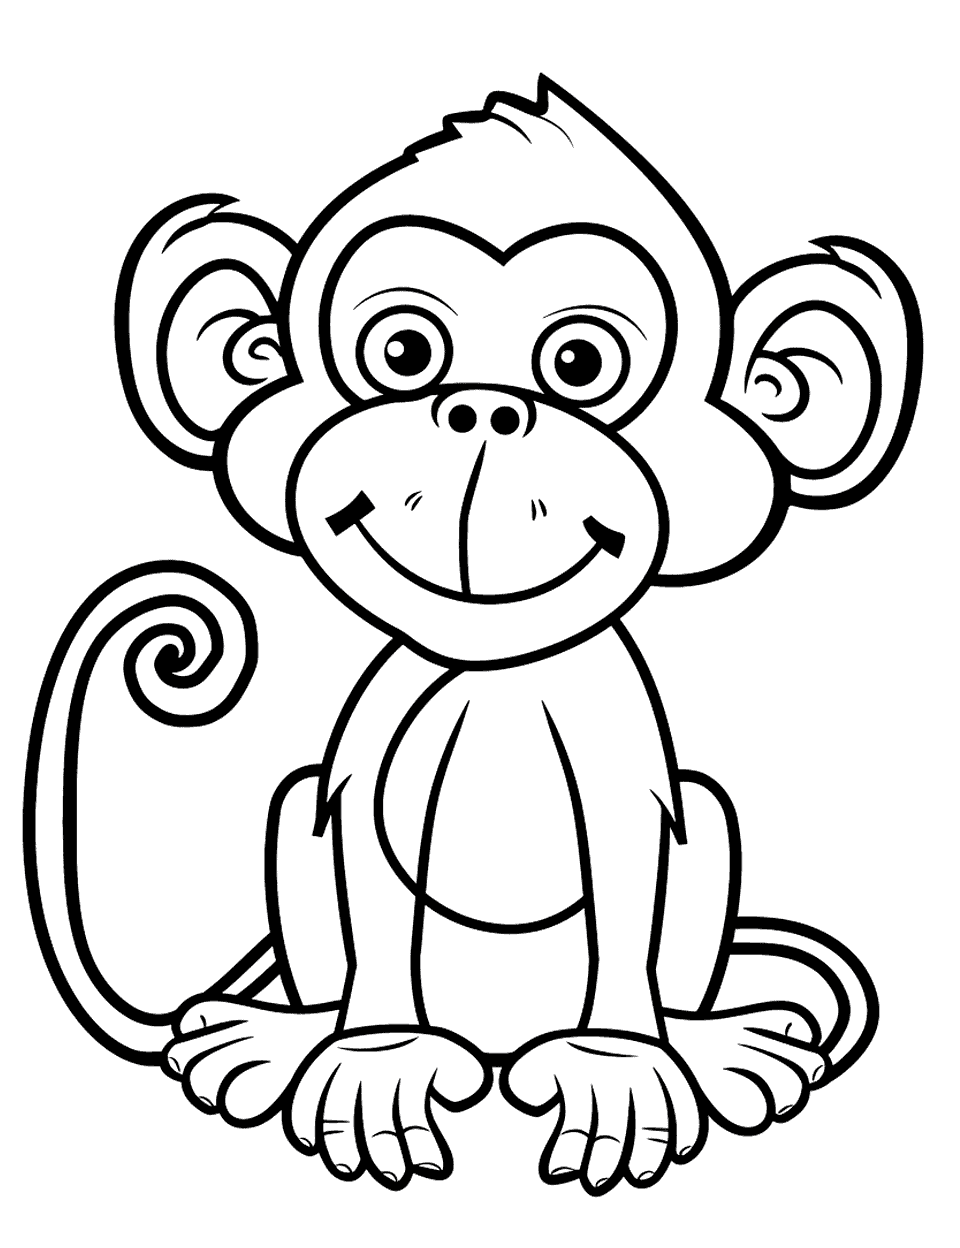 Easy Outline of a Monkey Coloring Page - A simple line drawing of a monkey, ideal for young children to color.